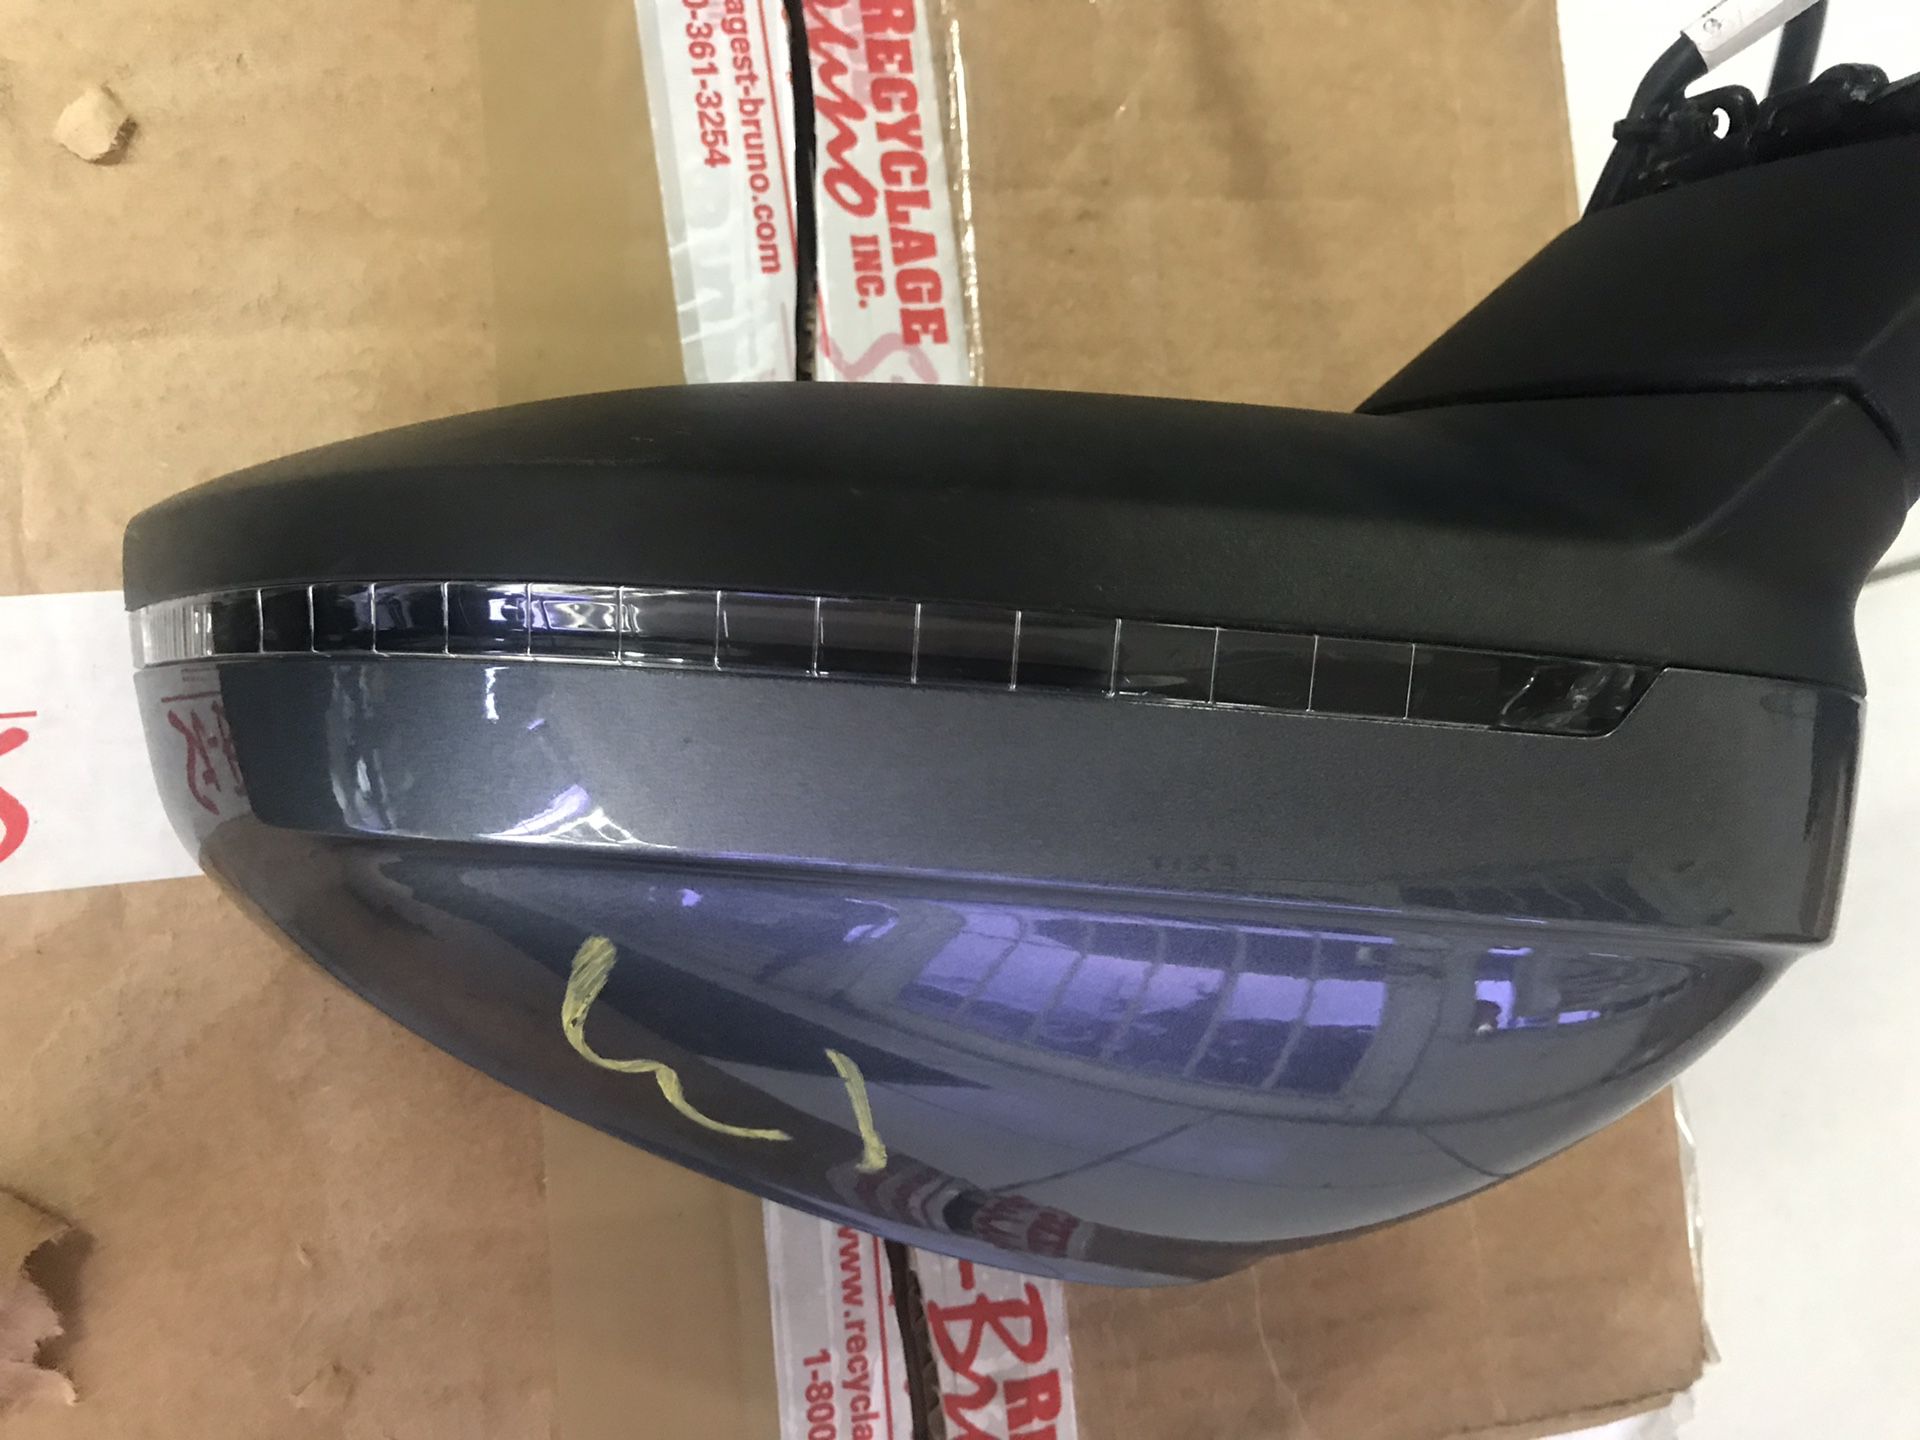 2019 Audi A4 Left Side Mirror. Comes with wires and led signal.